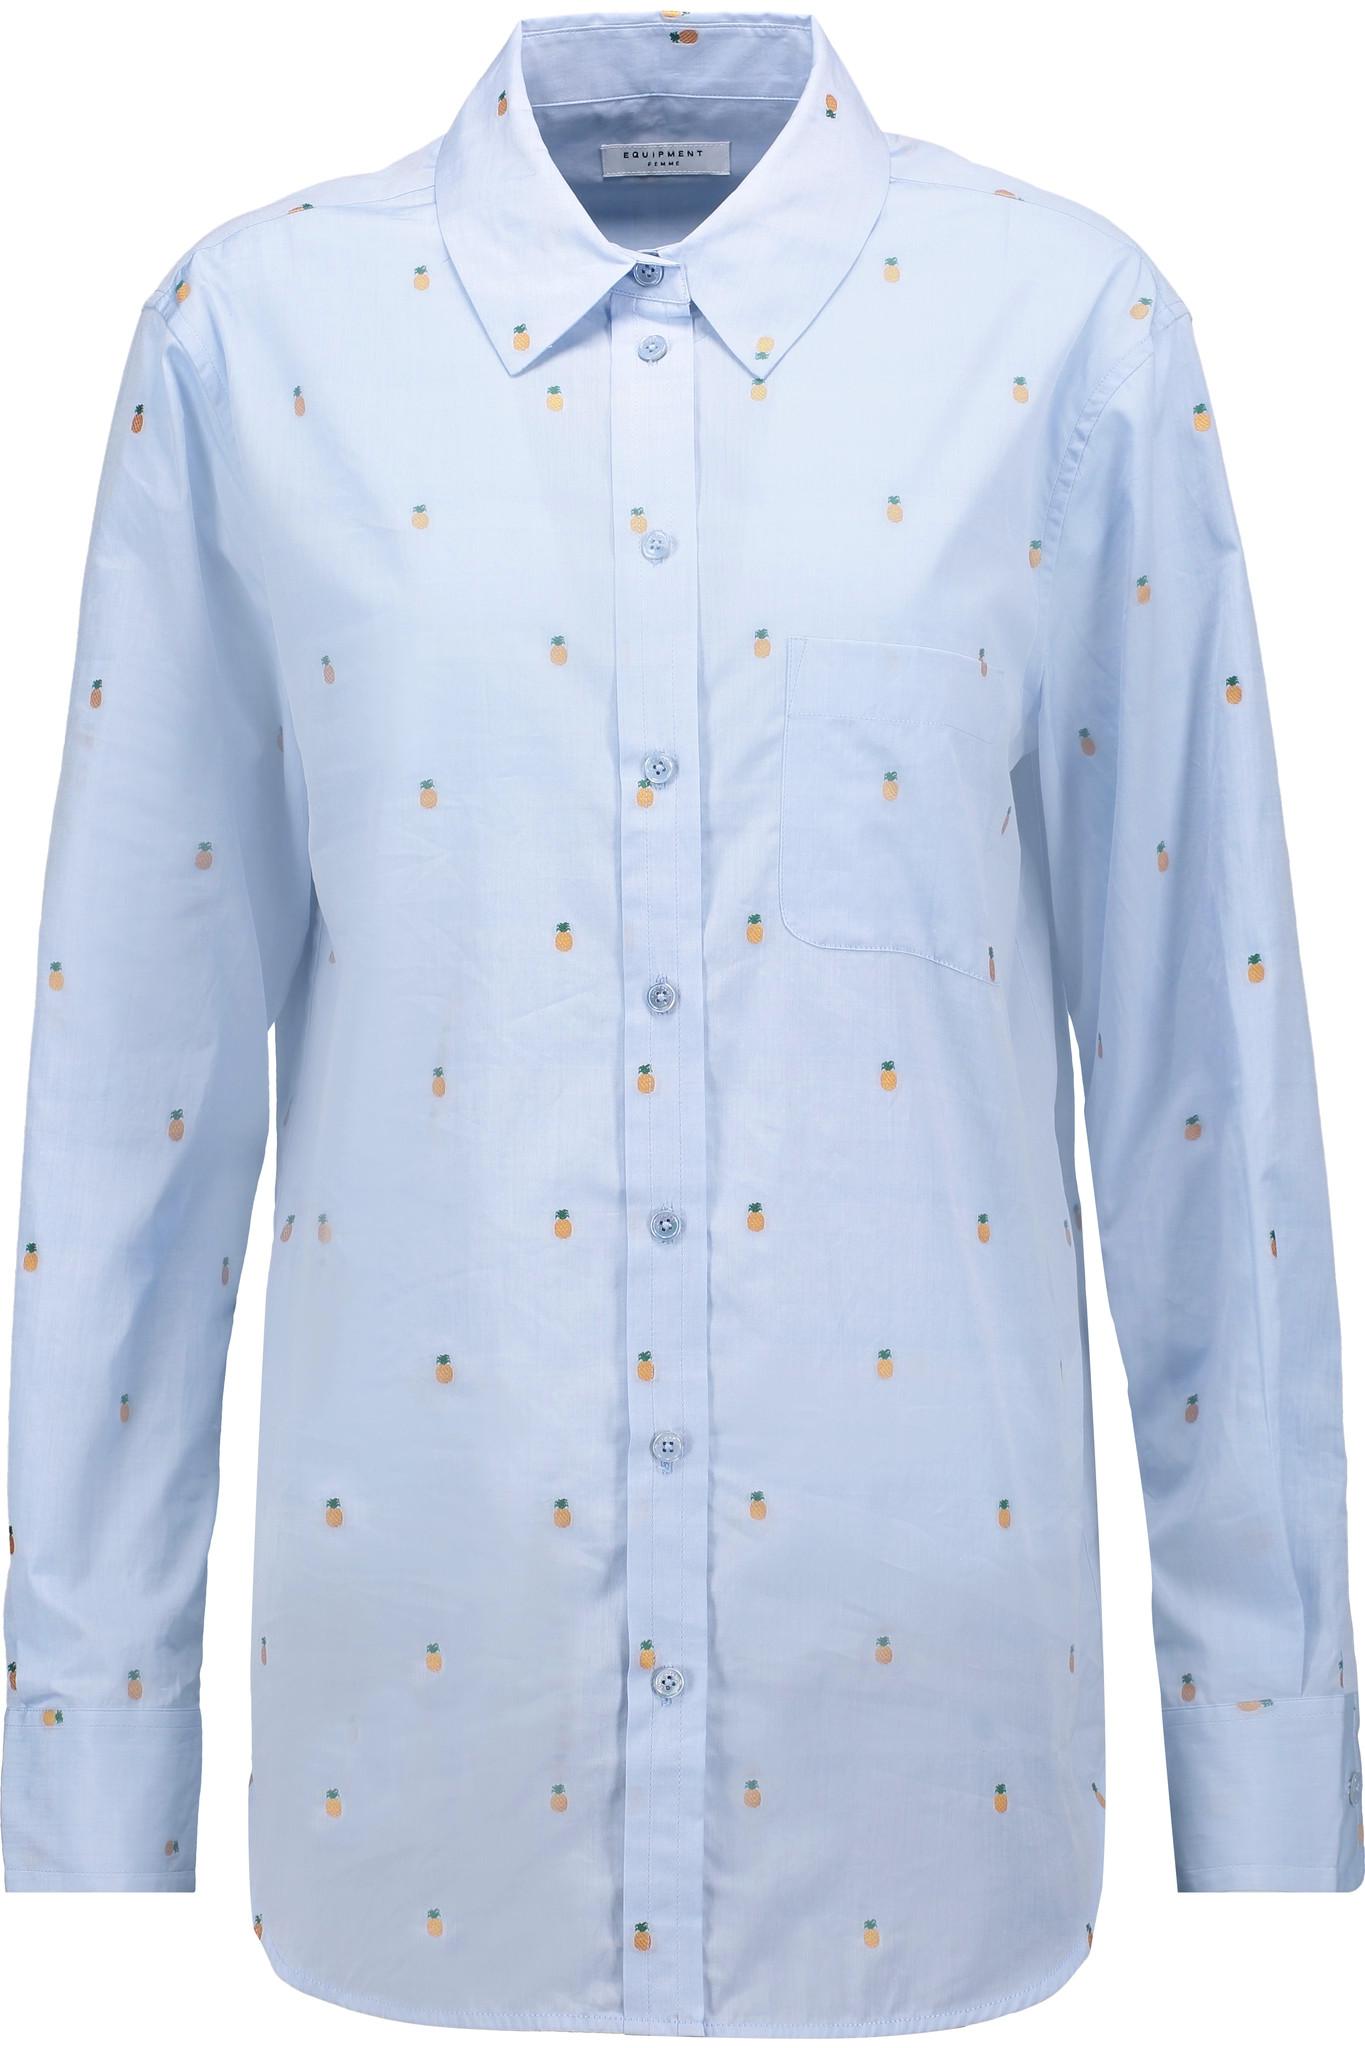 Lyst - Equipment Kenton Embroidered Cotton Shirt in Blue1365 x 2048